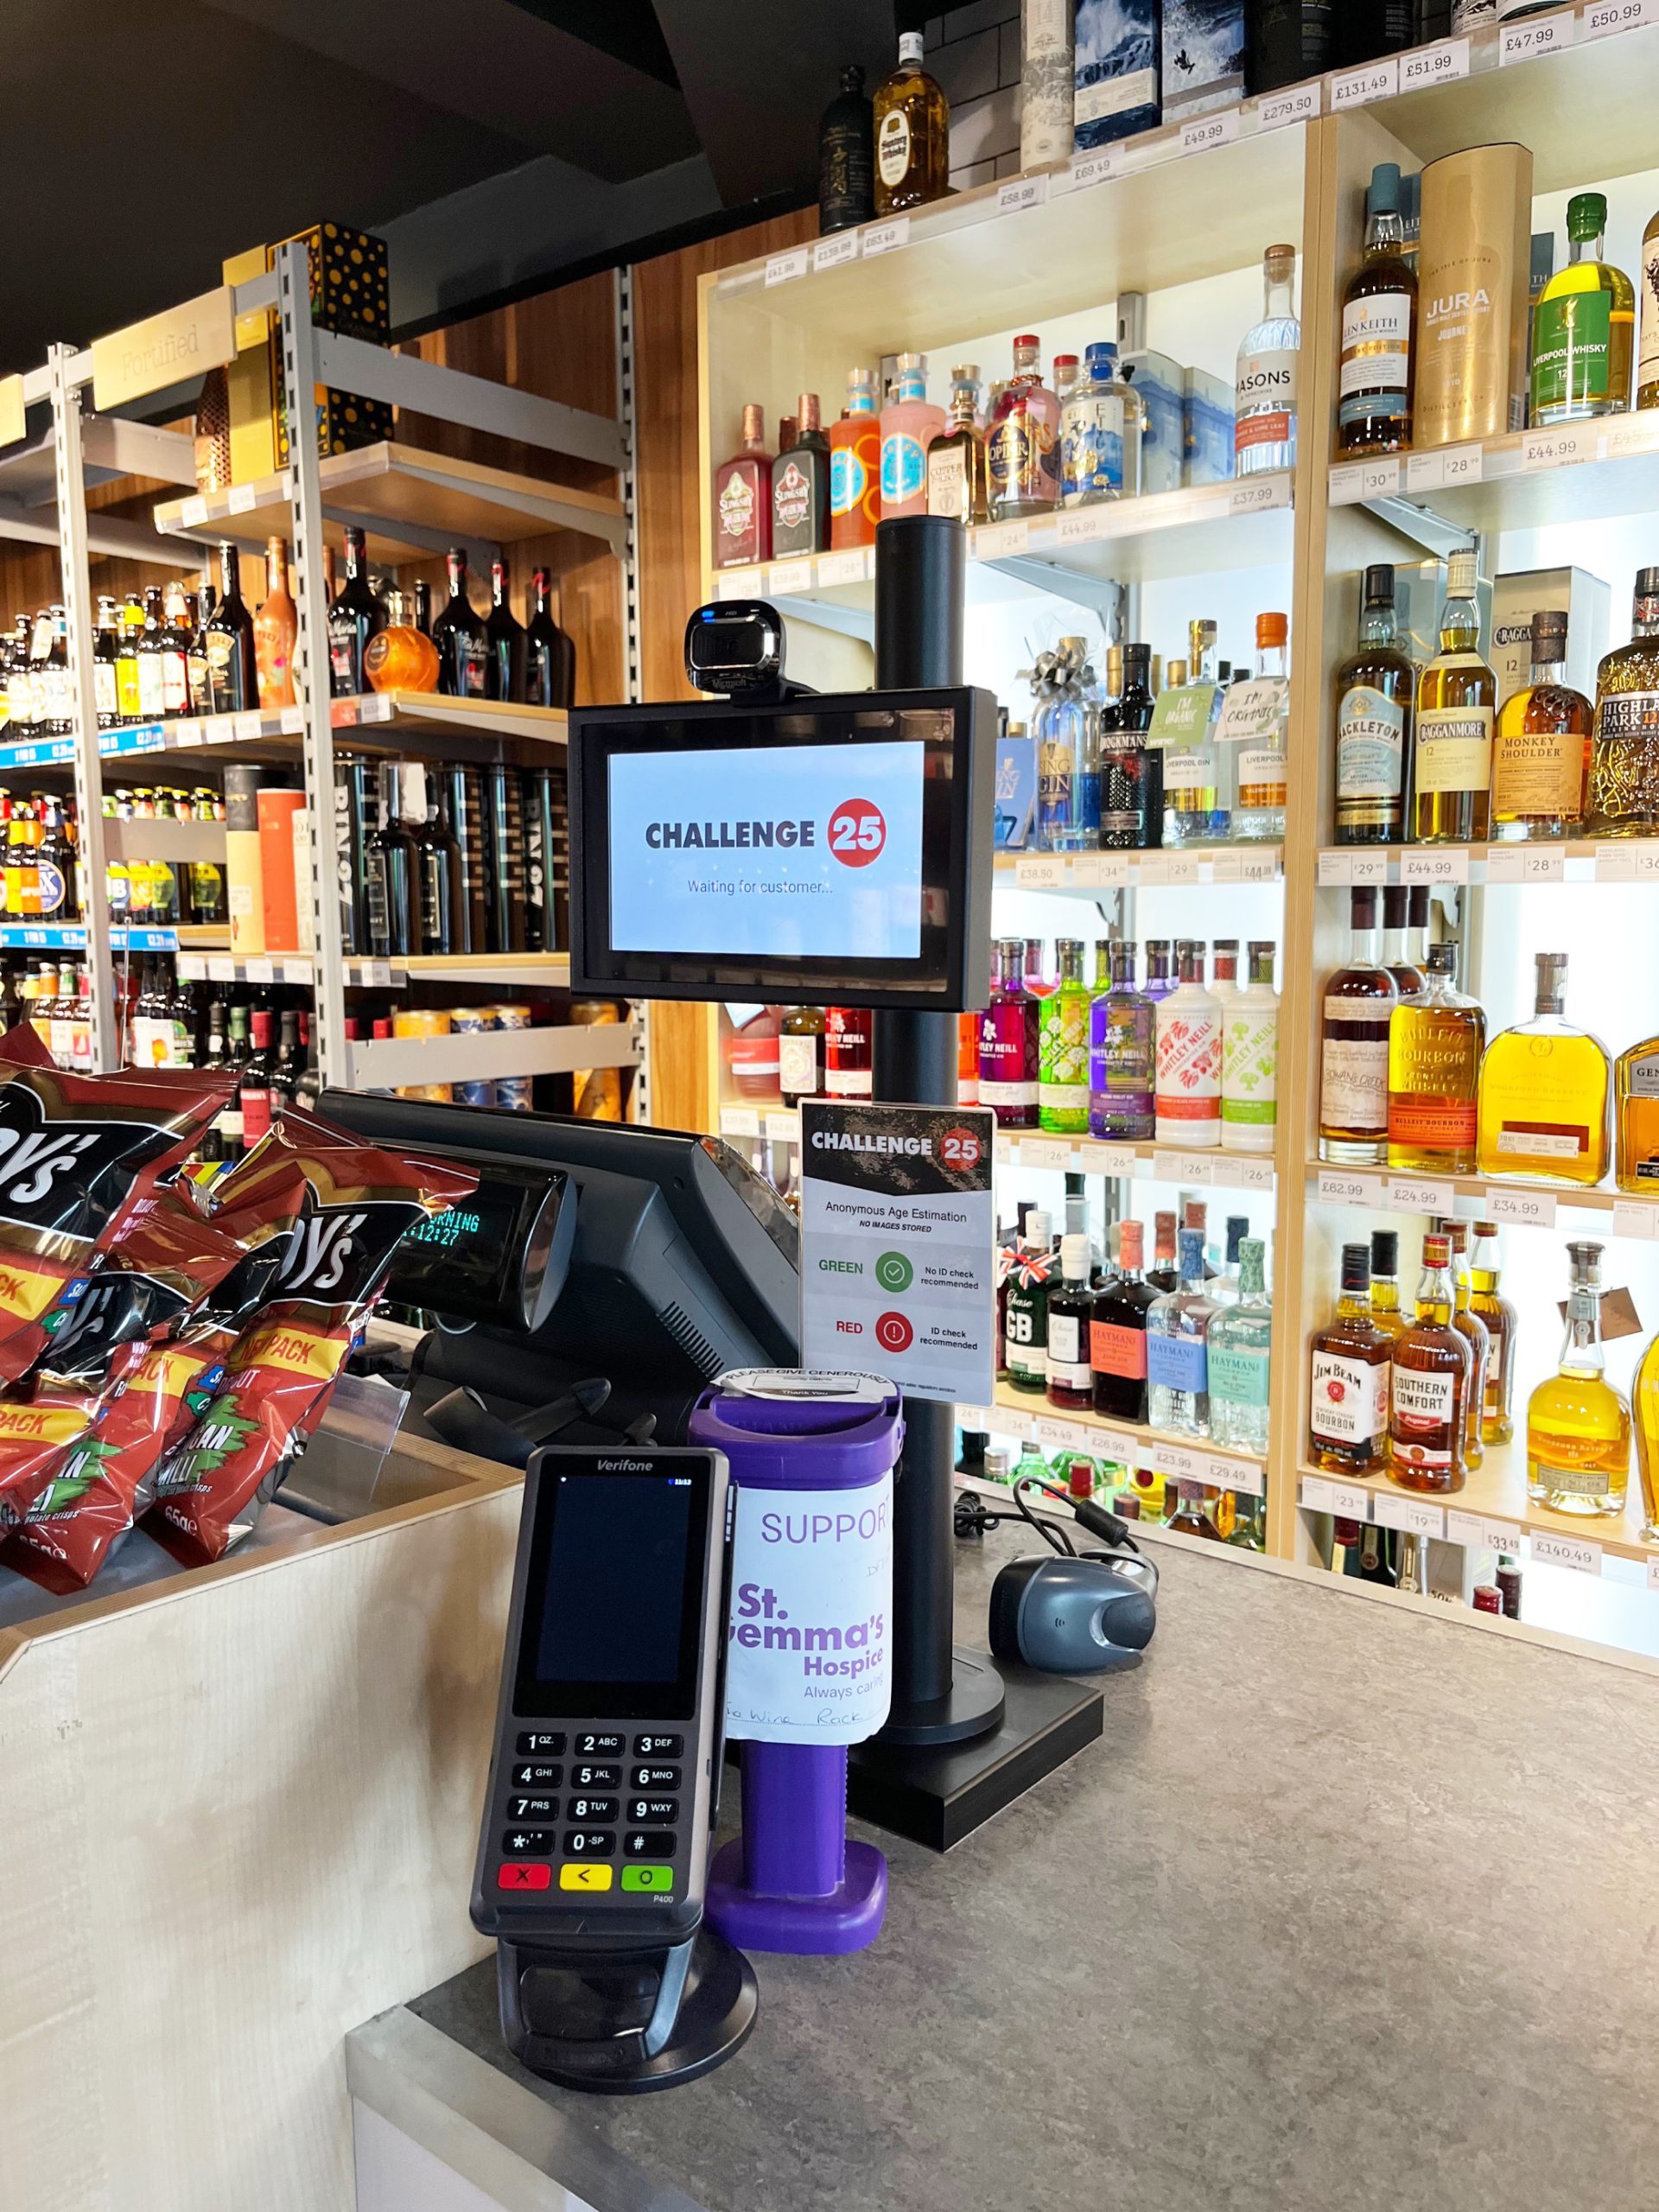 Costcutter owner pilots age verification technology in 3 stores